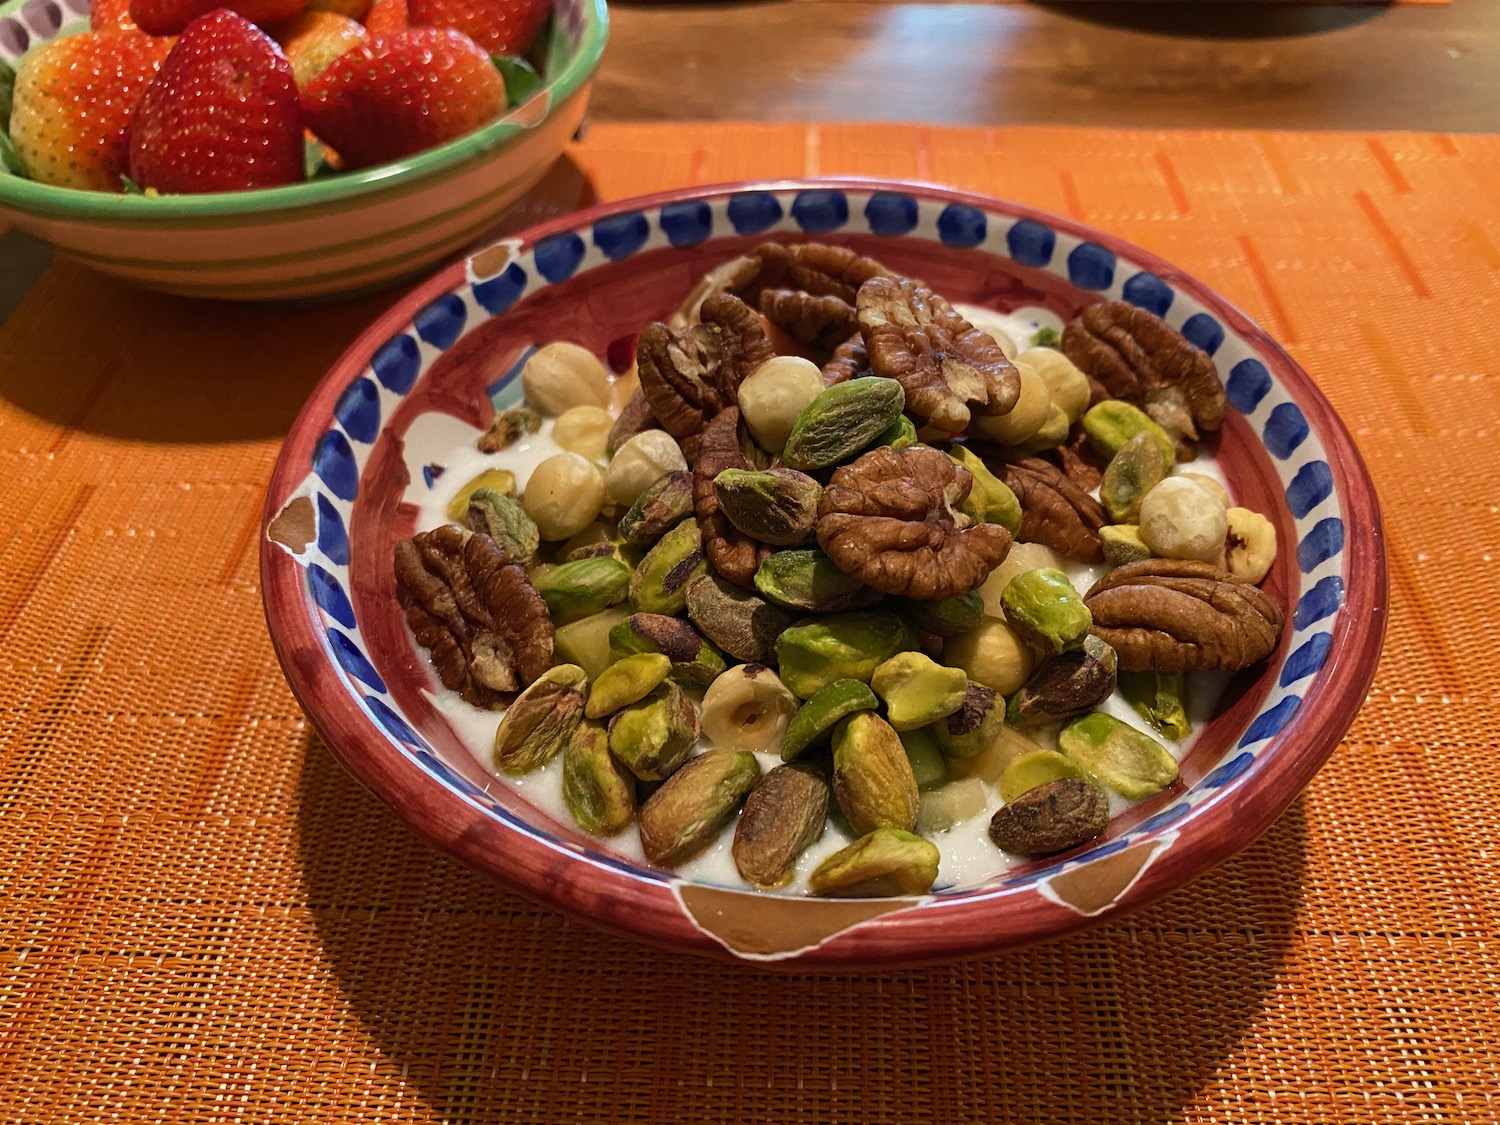 a bowl of nuts and milk